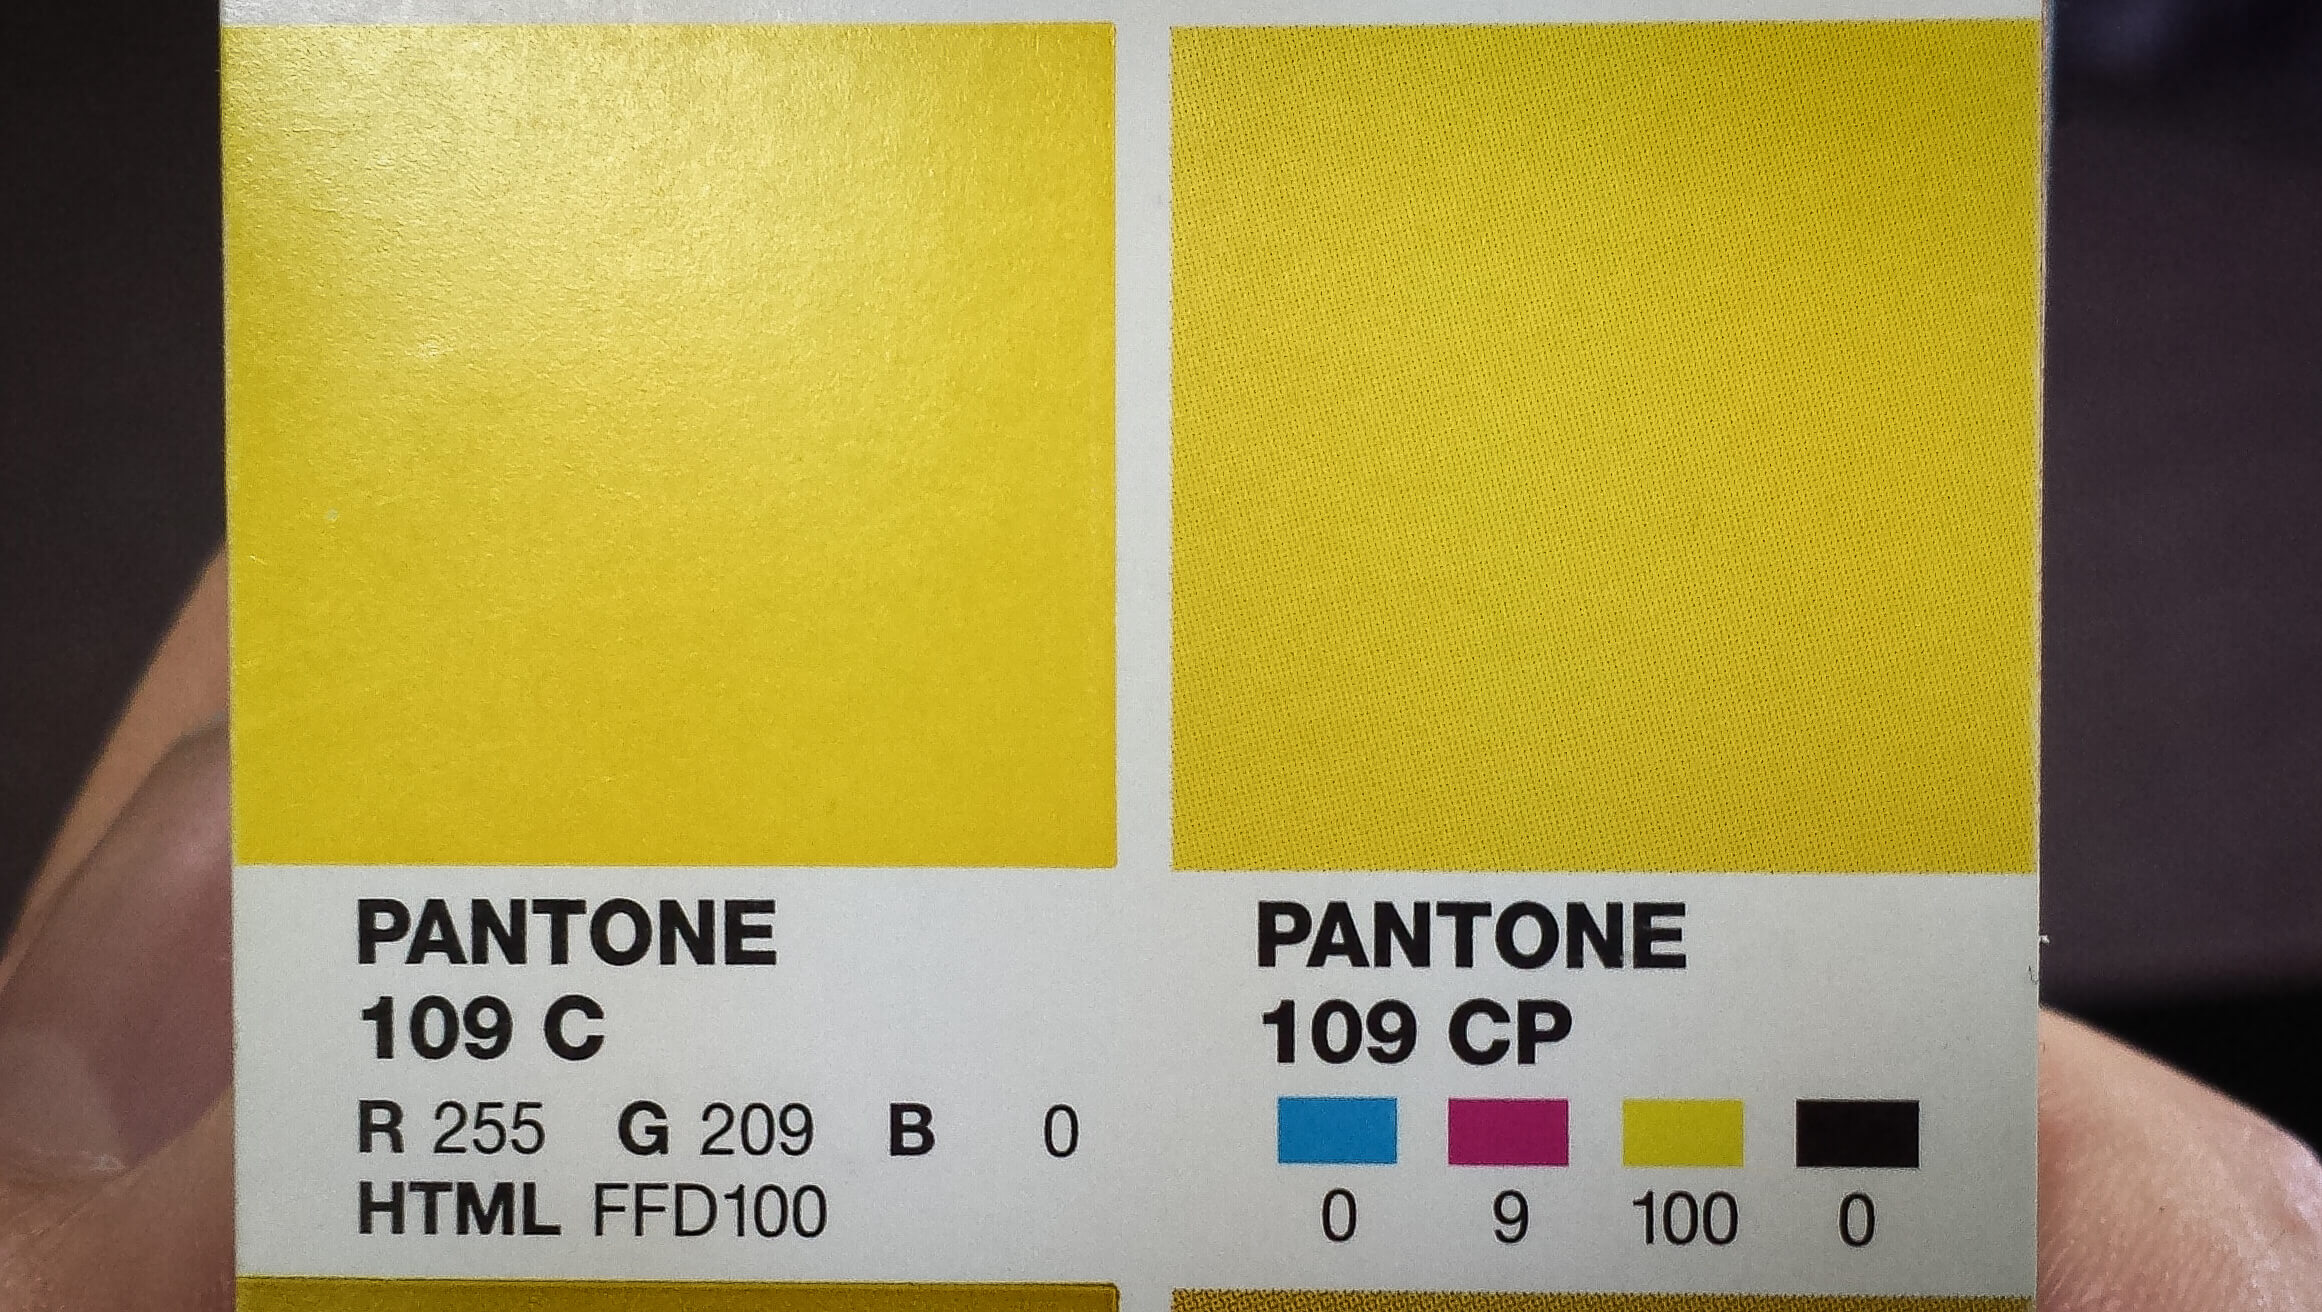 Pantone swatches include recommended CMYK, RGB and HTML values